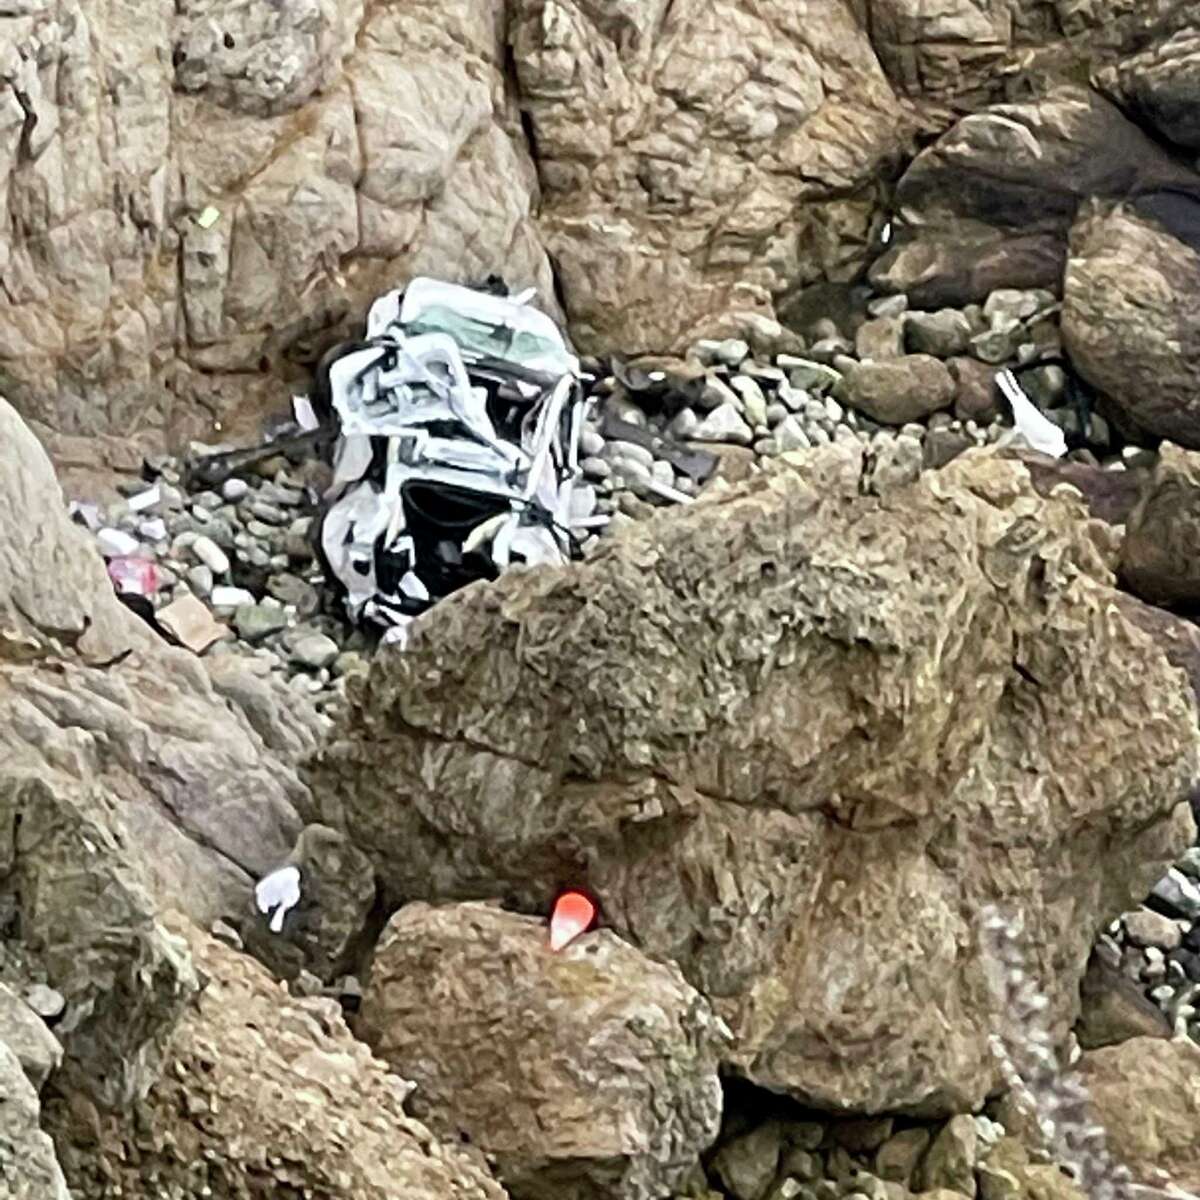 FILE - This image from video provided by San Mateo County Sheriff's Office shows a Tesla vehicle that plunged off a Northern California cliff along the Pacific Coast Highway, Monday, Jan. 2, 2023, near an area known as Devil's Slide. (San Mateo County Sheriff's Office via AP, File)